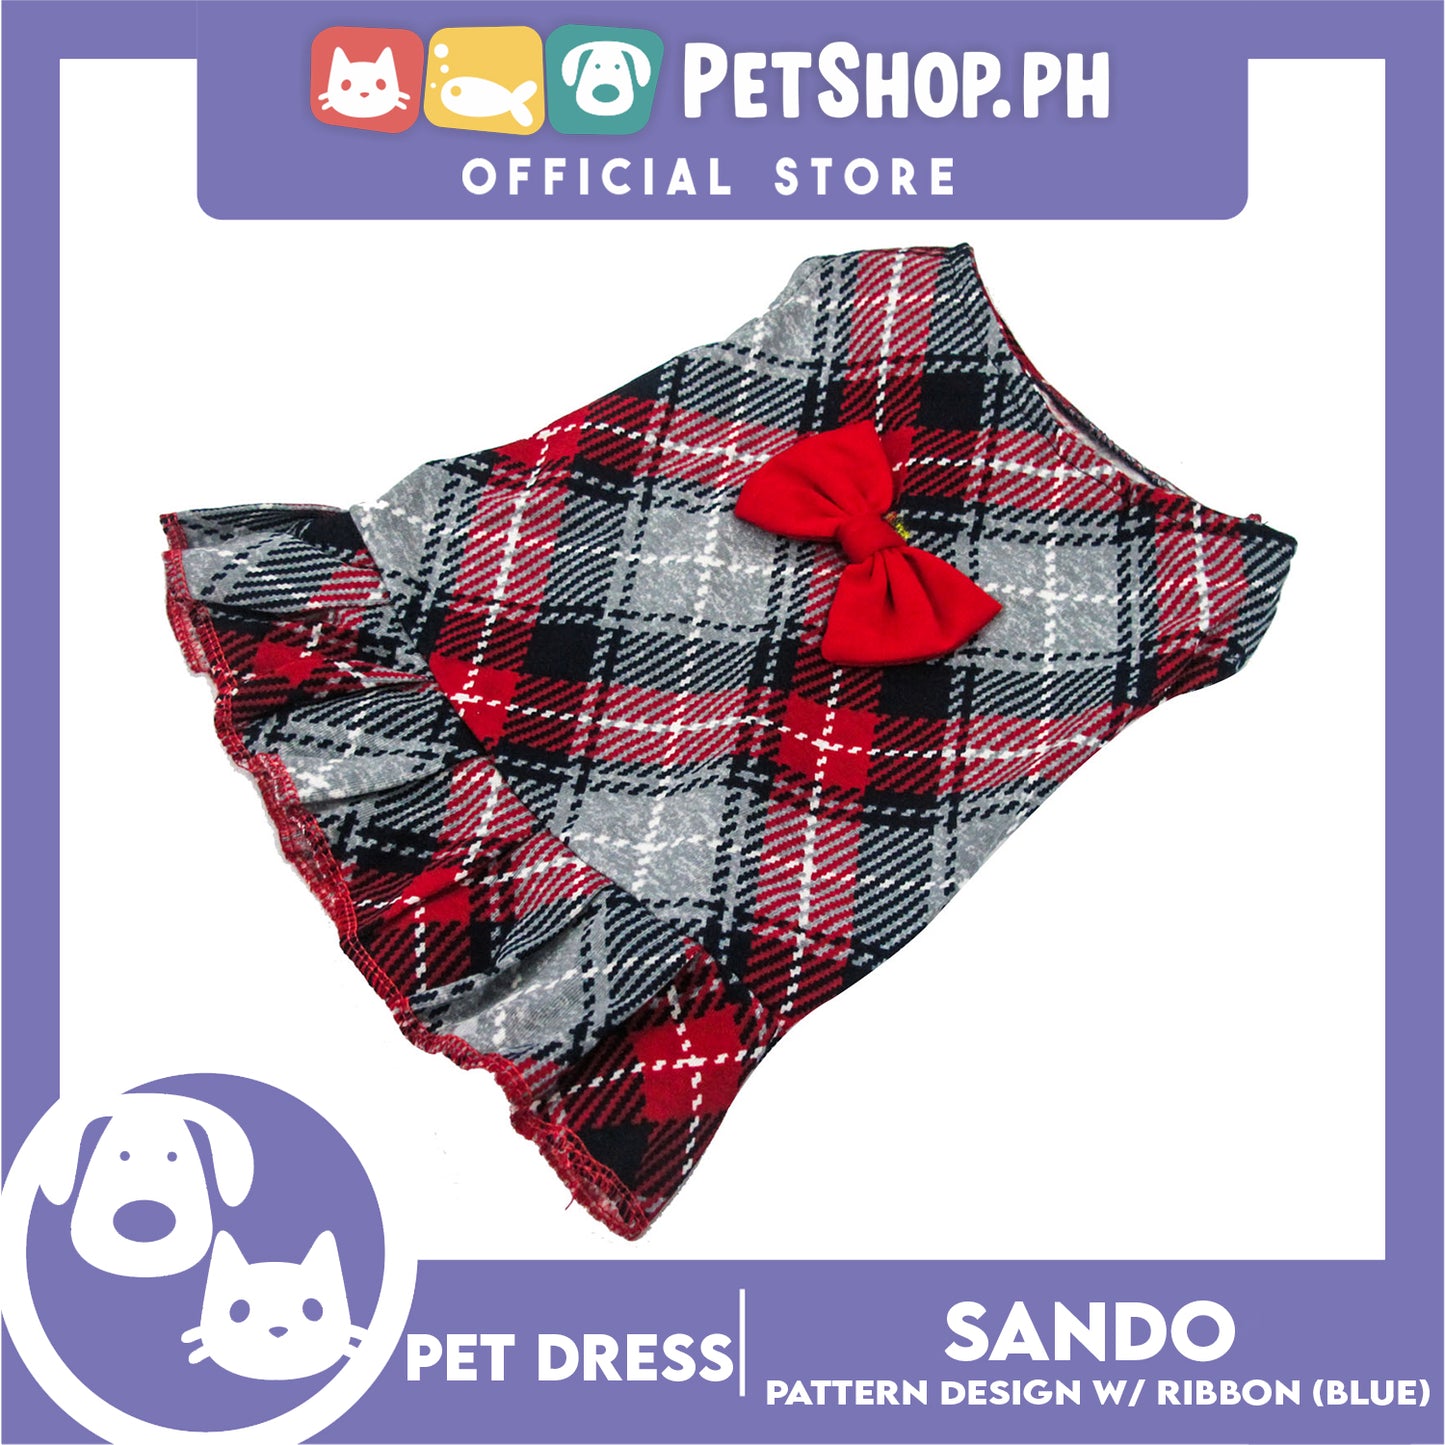 Pet Dress Summer Blue Checkered Skirt with Red Ribbon (Large) for Small Dog and Cat- Cute Pet Clothes